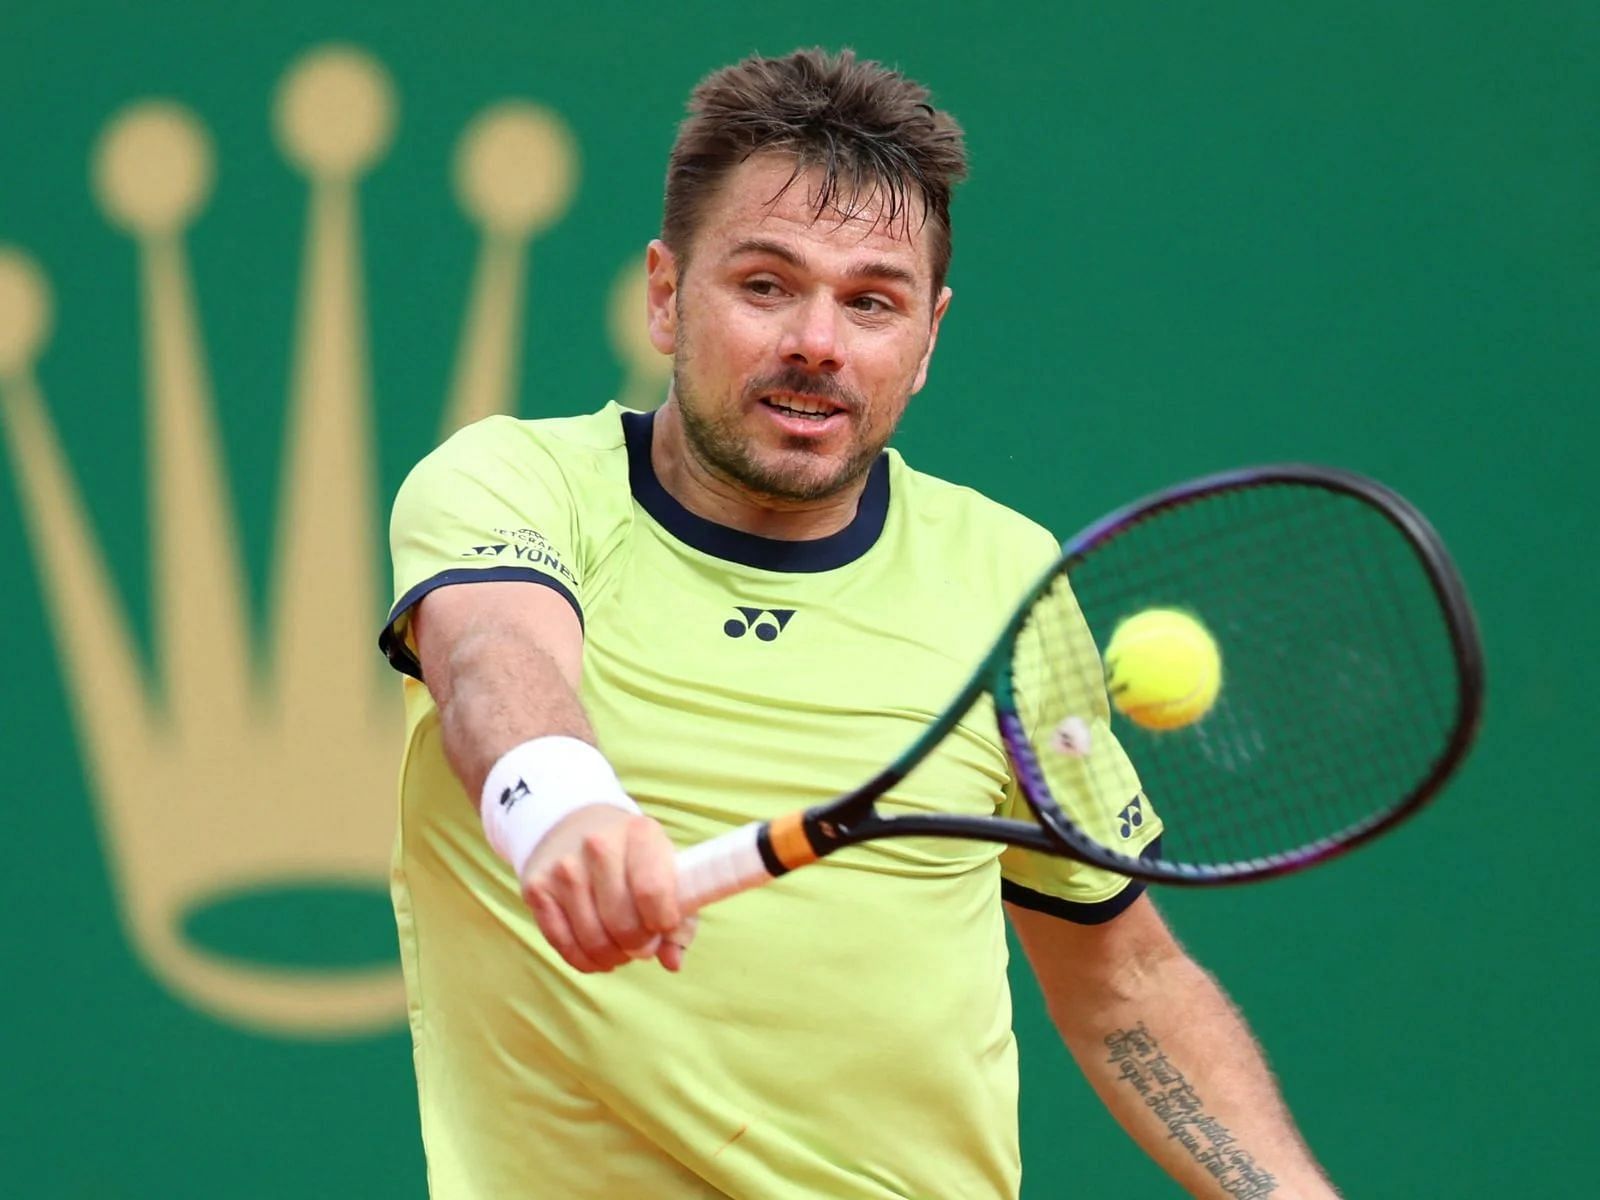 Wawrinka served poorly in the match